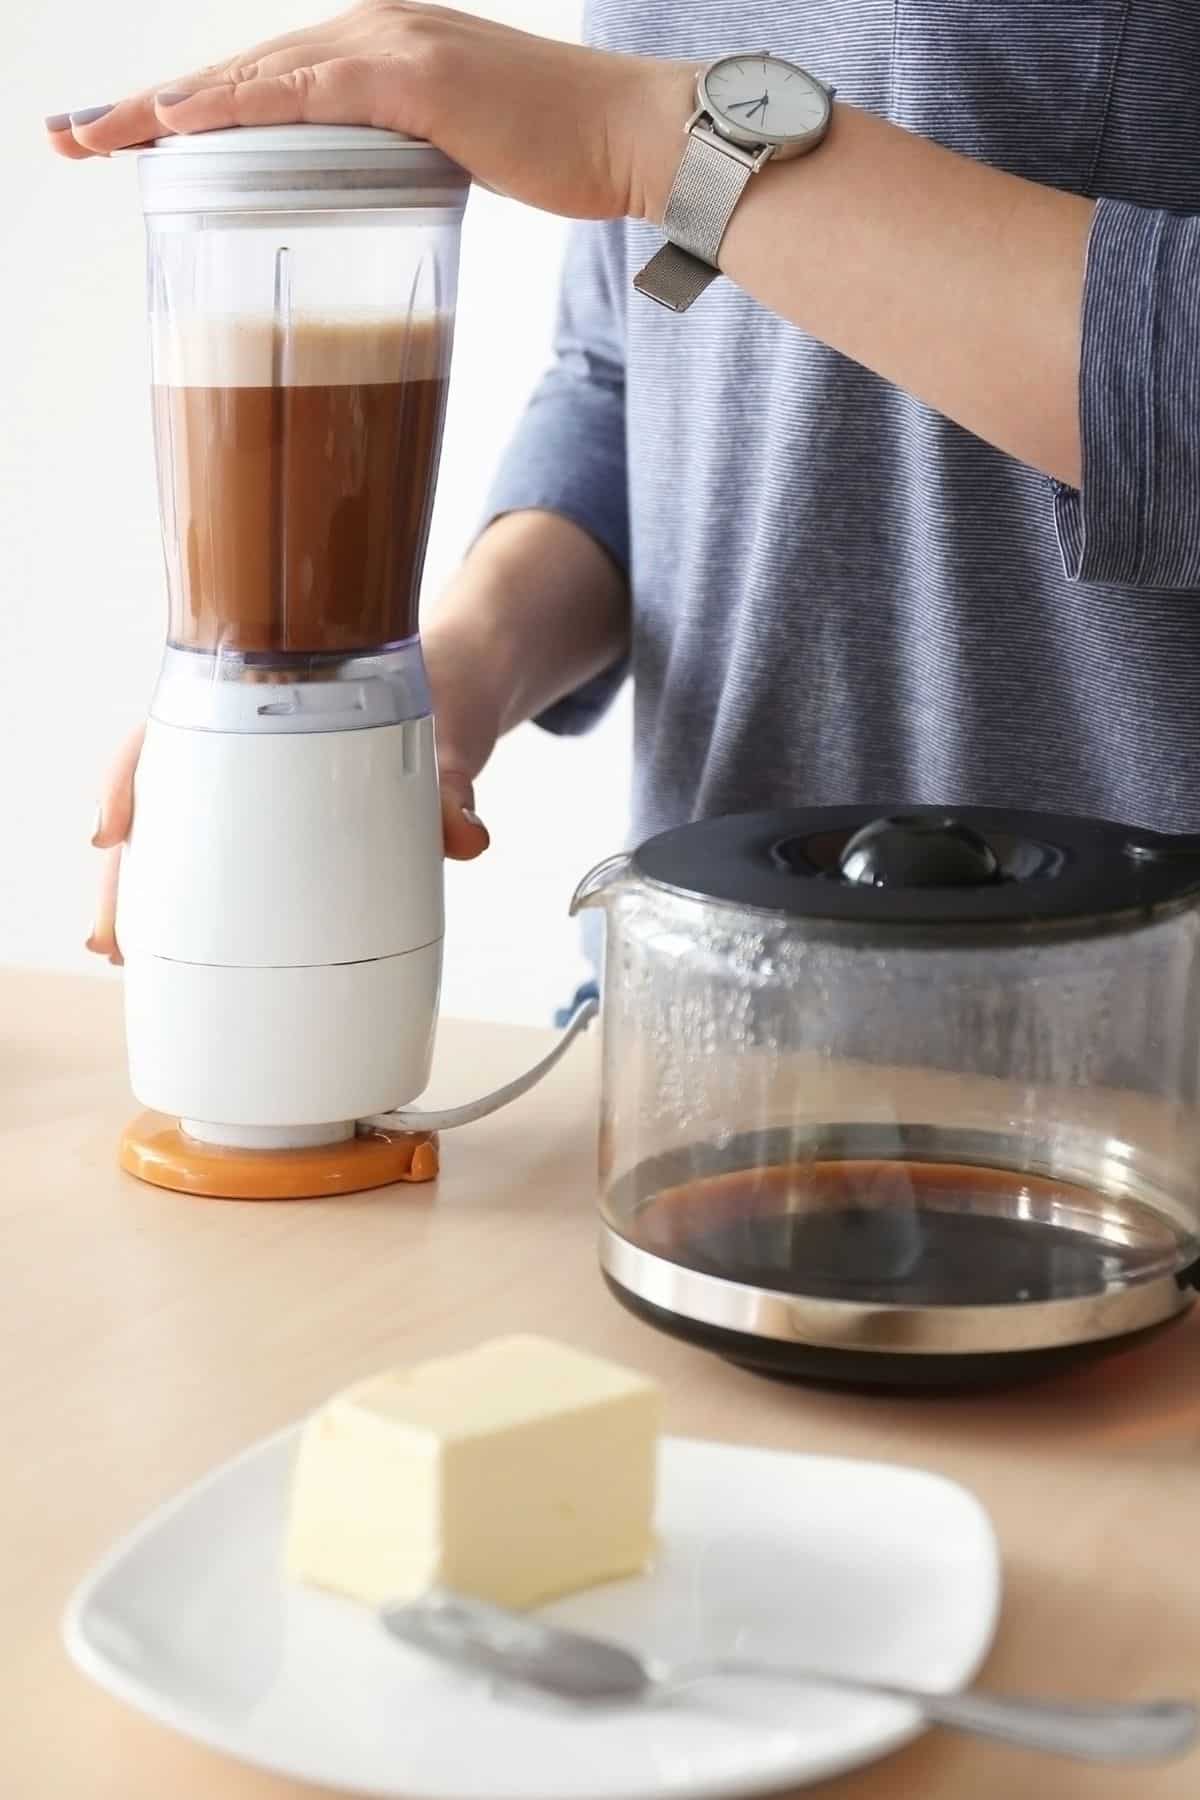 https://www.cleaneatingkitchen.com/wp-content/uploads/2020/12/woman-making-a-butter-blended-coffee.jpg